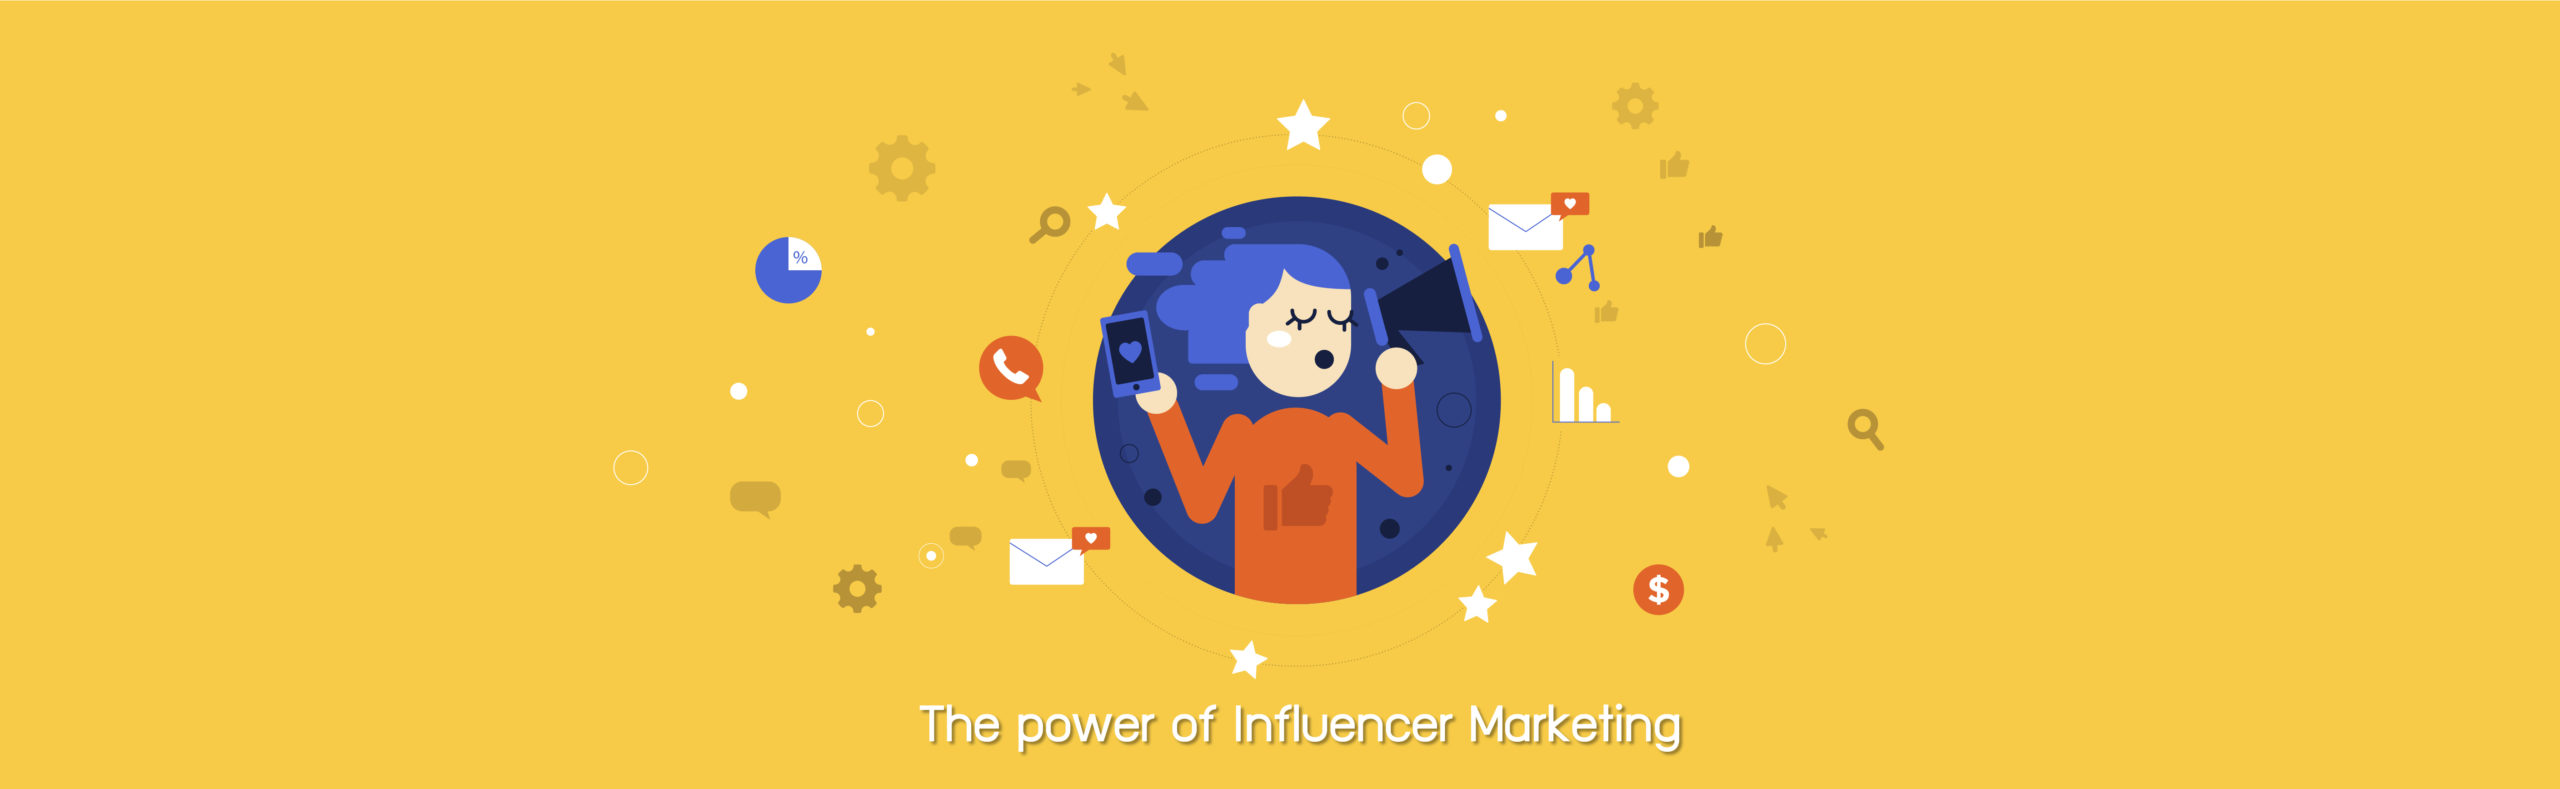 The power of Influencer Marketing 01 1 4 scaled